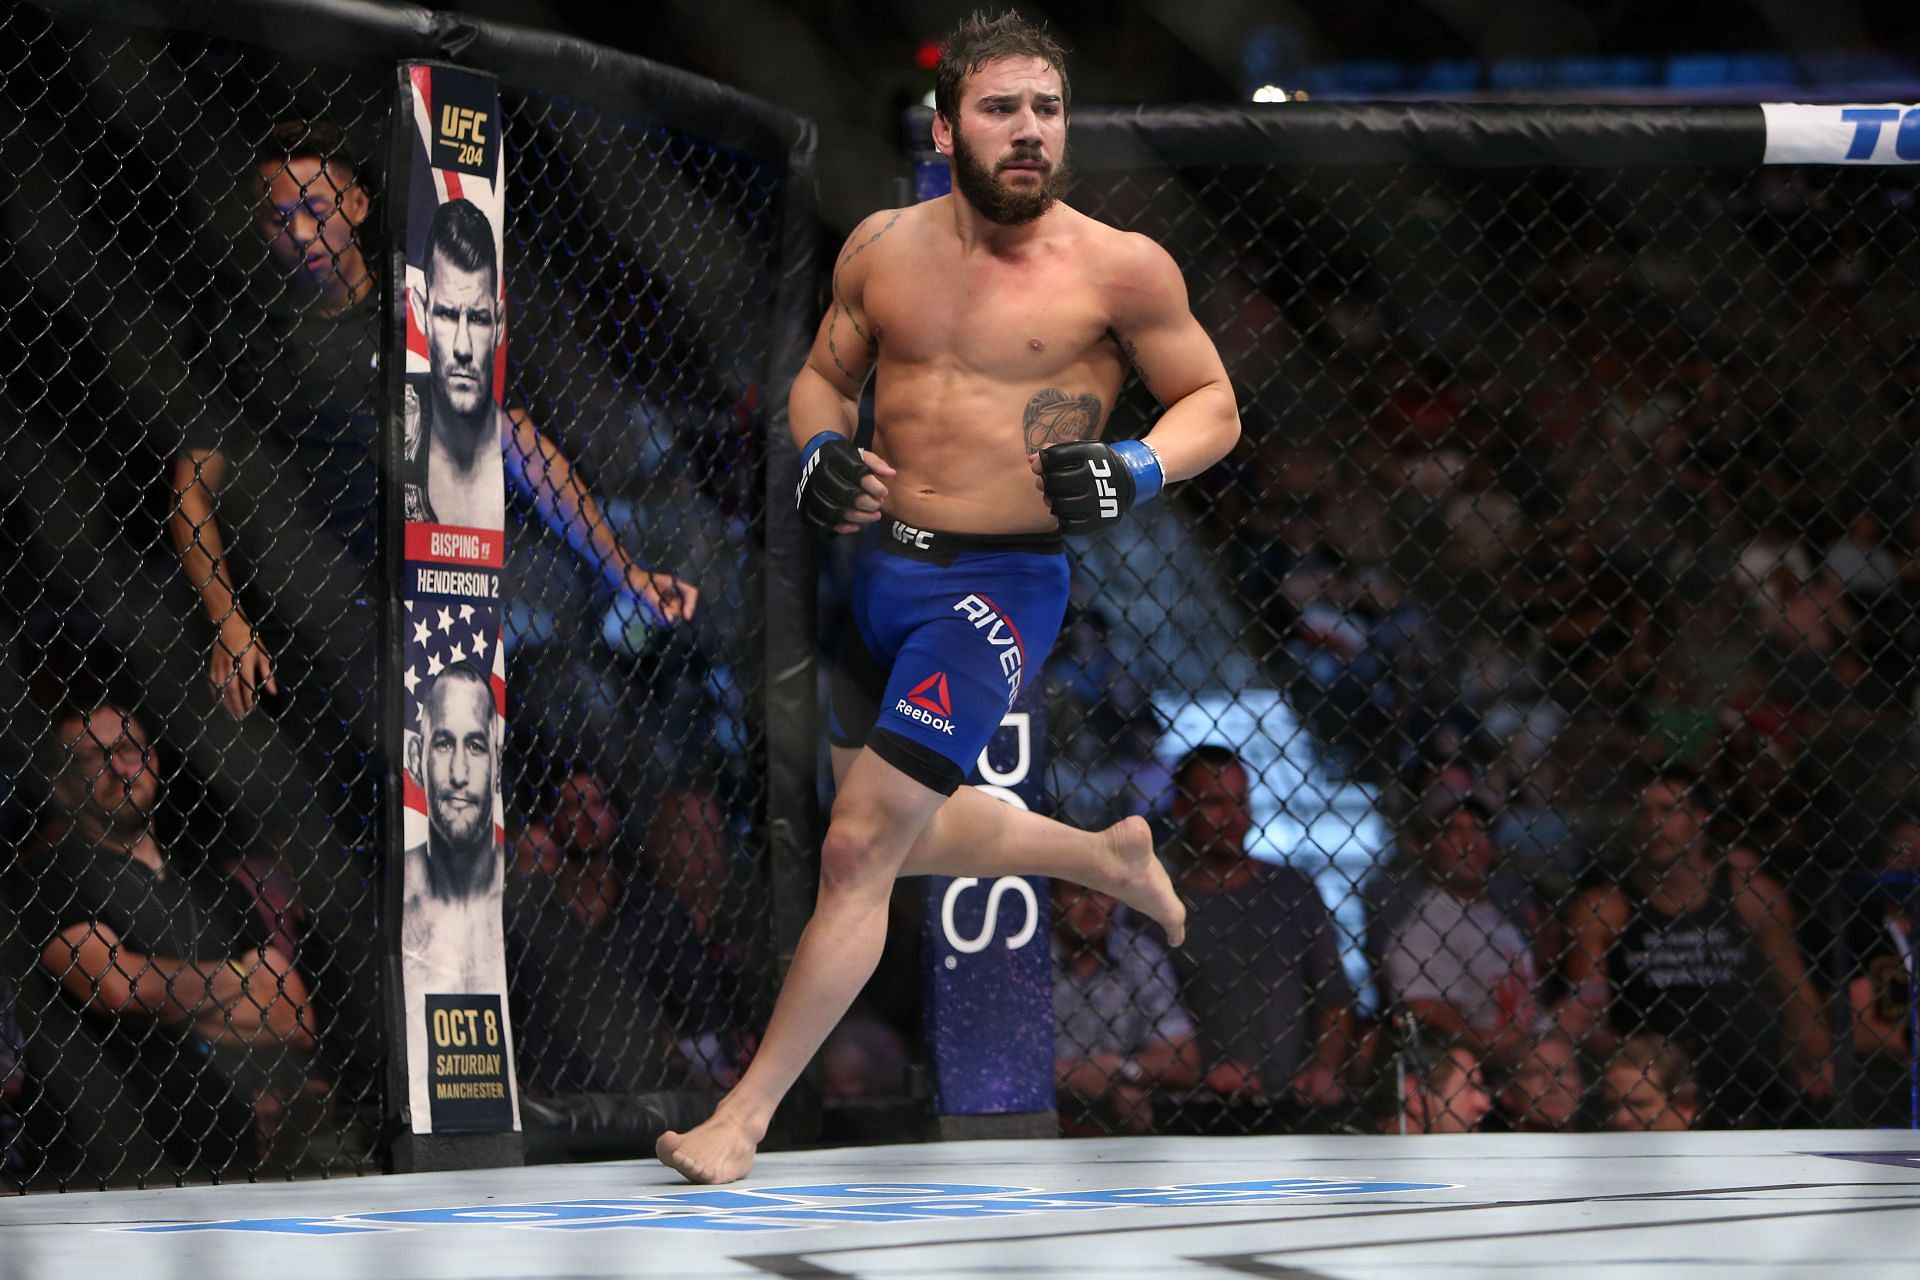 UFC 203: Jimmie Rivera entering the octagon